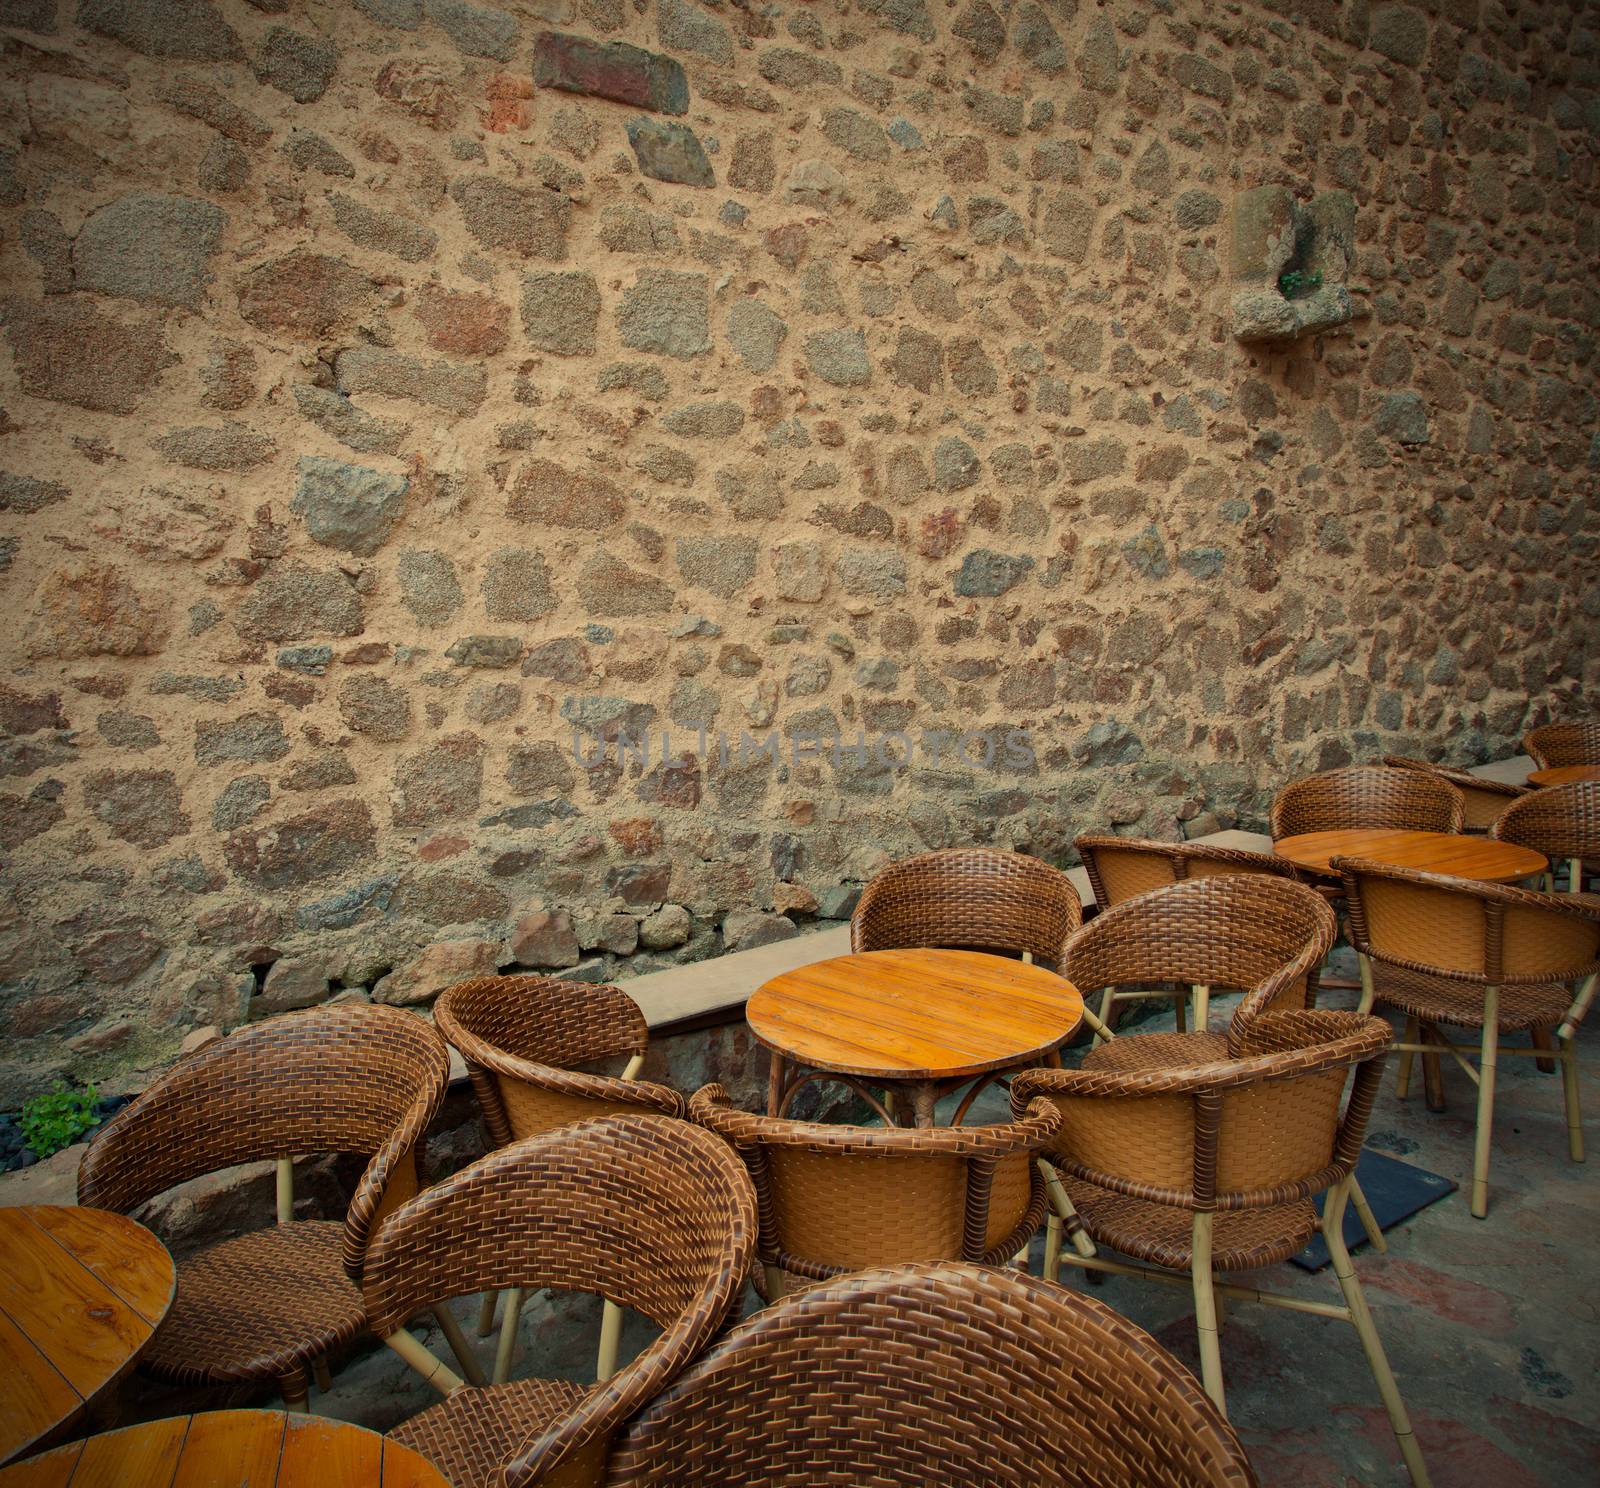 summer cafe near the ancient stone wall by Astroid